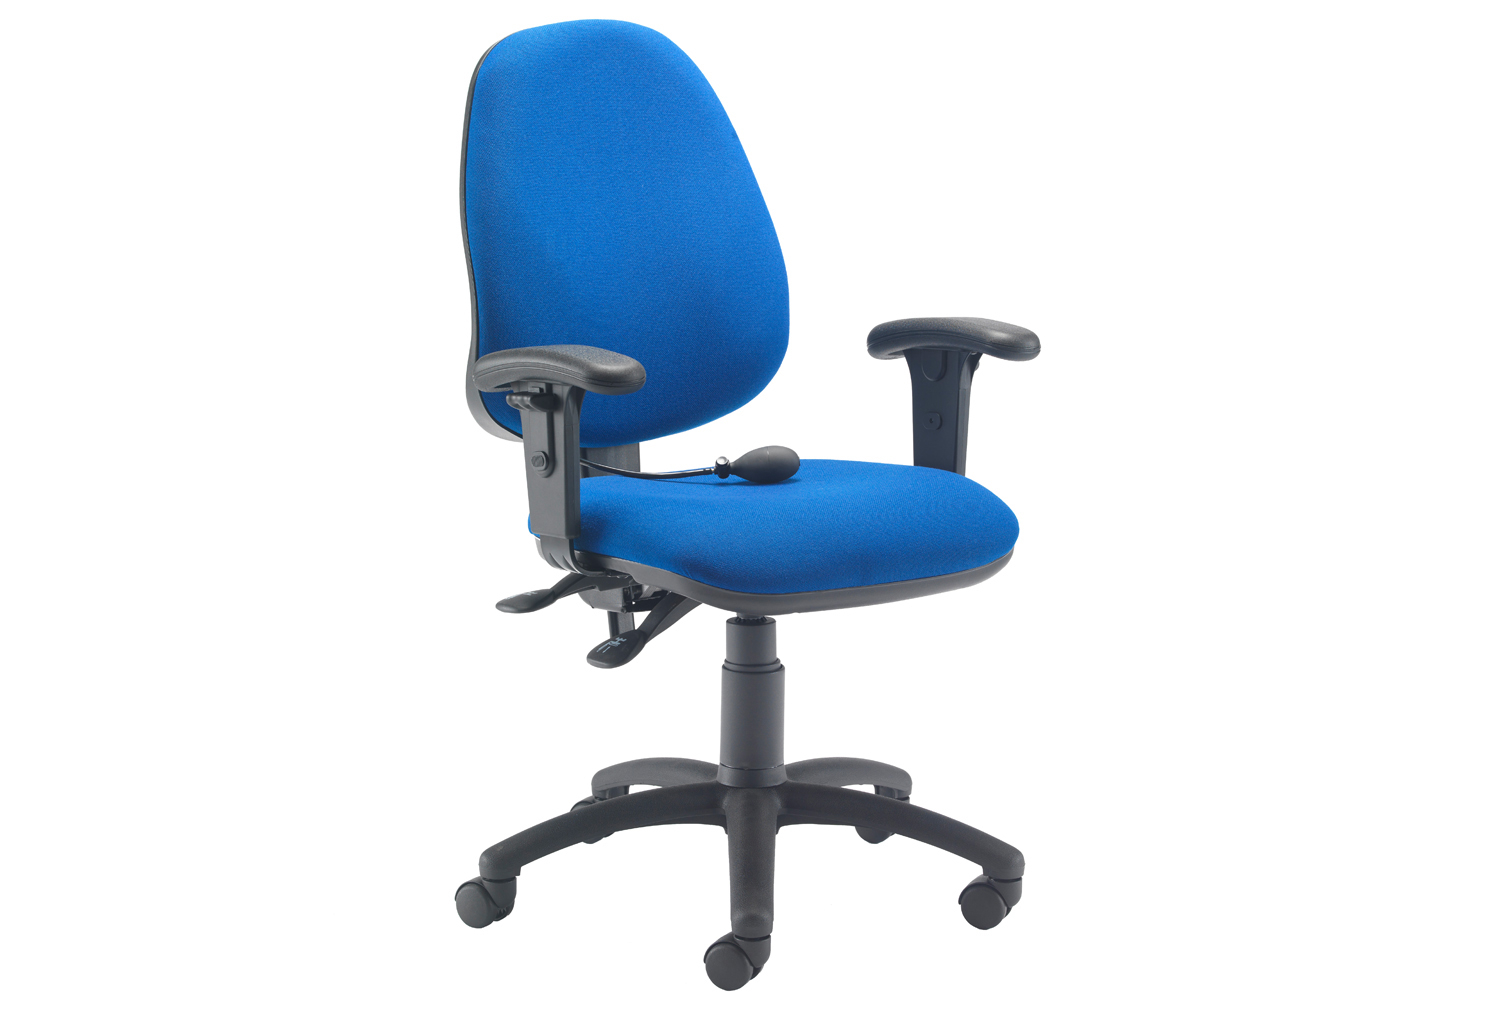 Orchid Lumbar Pump Ergonomic Operator Office Chair With Height Adjustable Arms, Blue